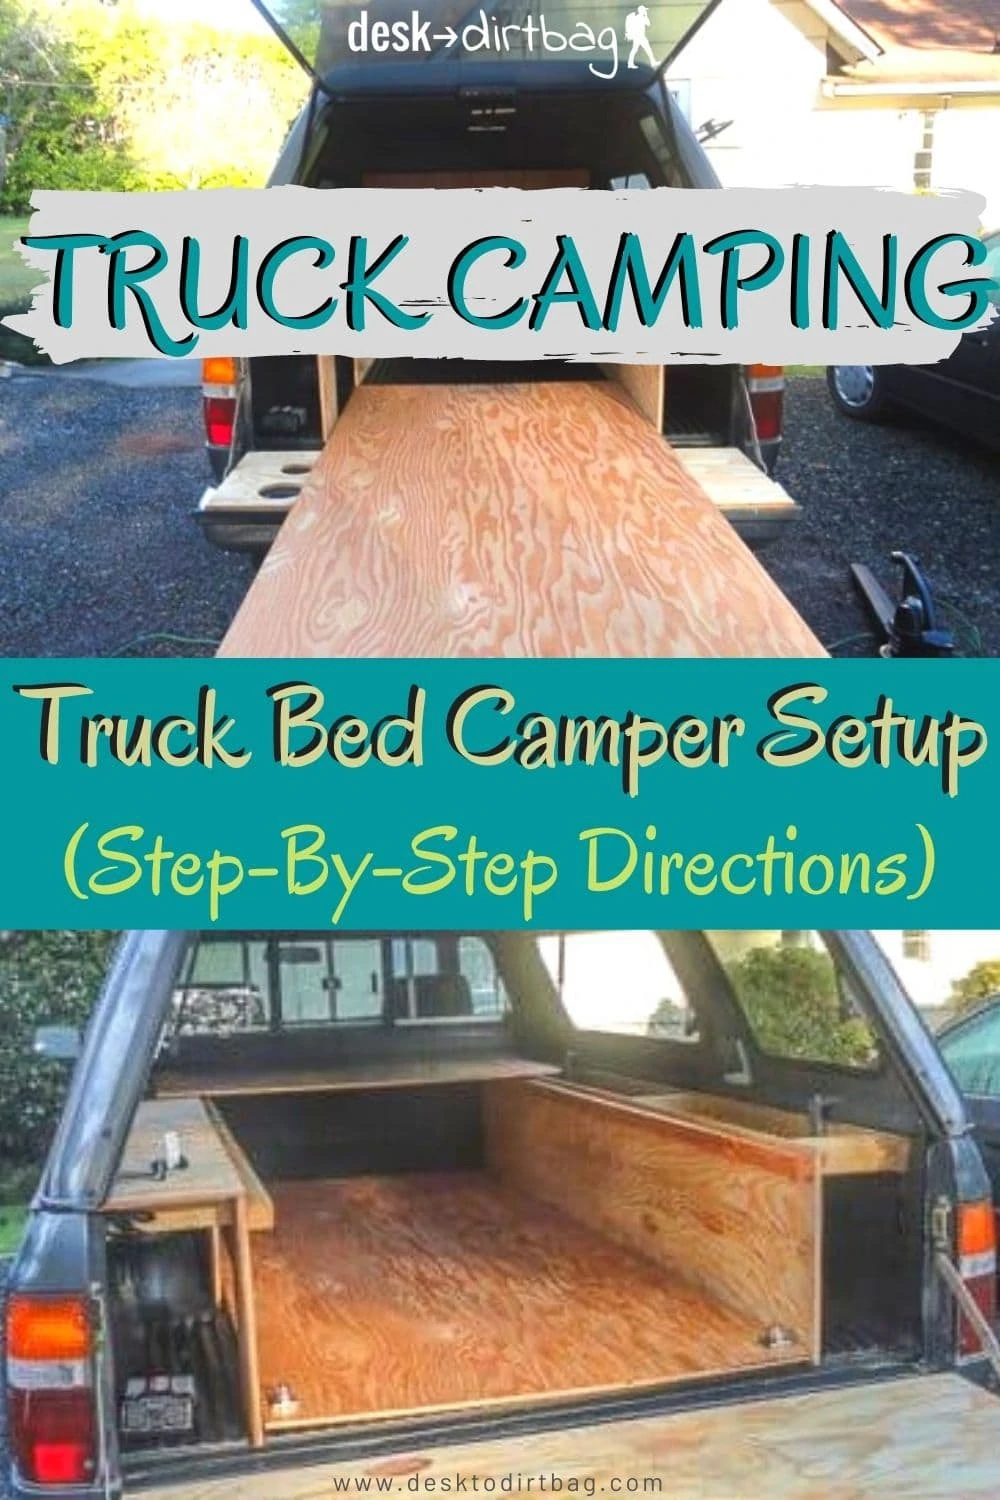 How to Build the Ultimate DIY Truck Bed Camper Setup (Step-by-Step)